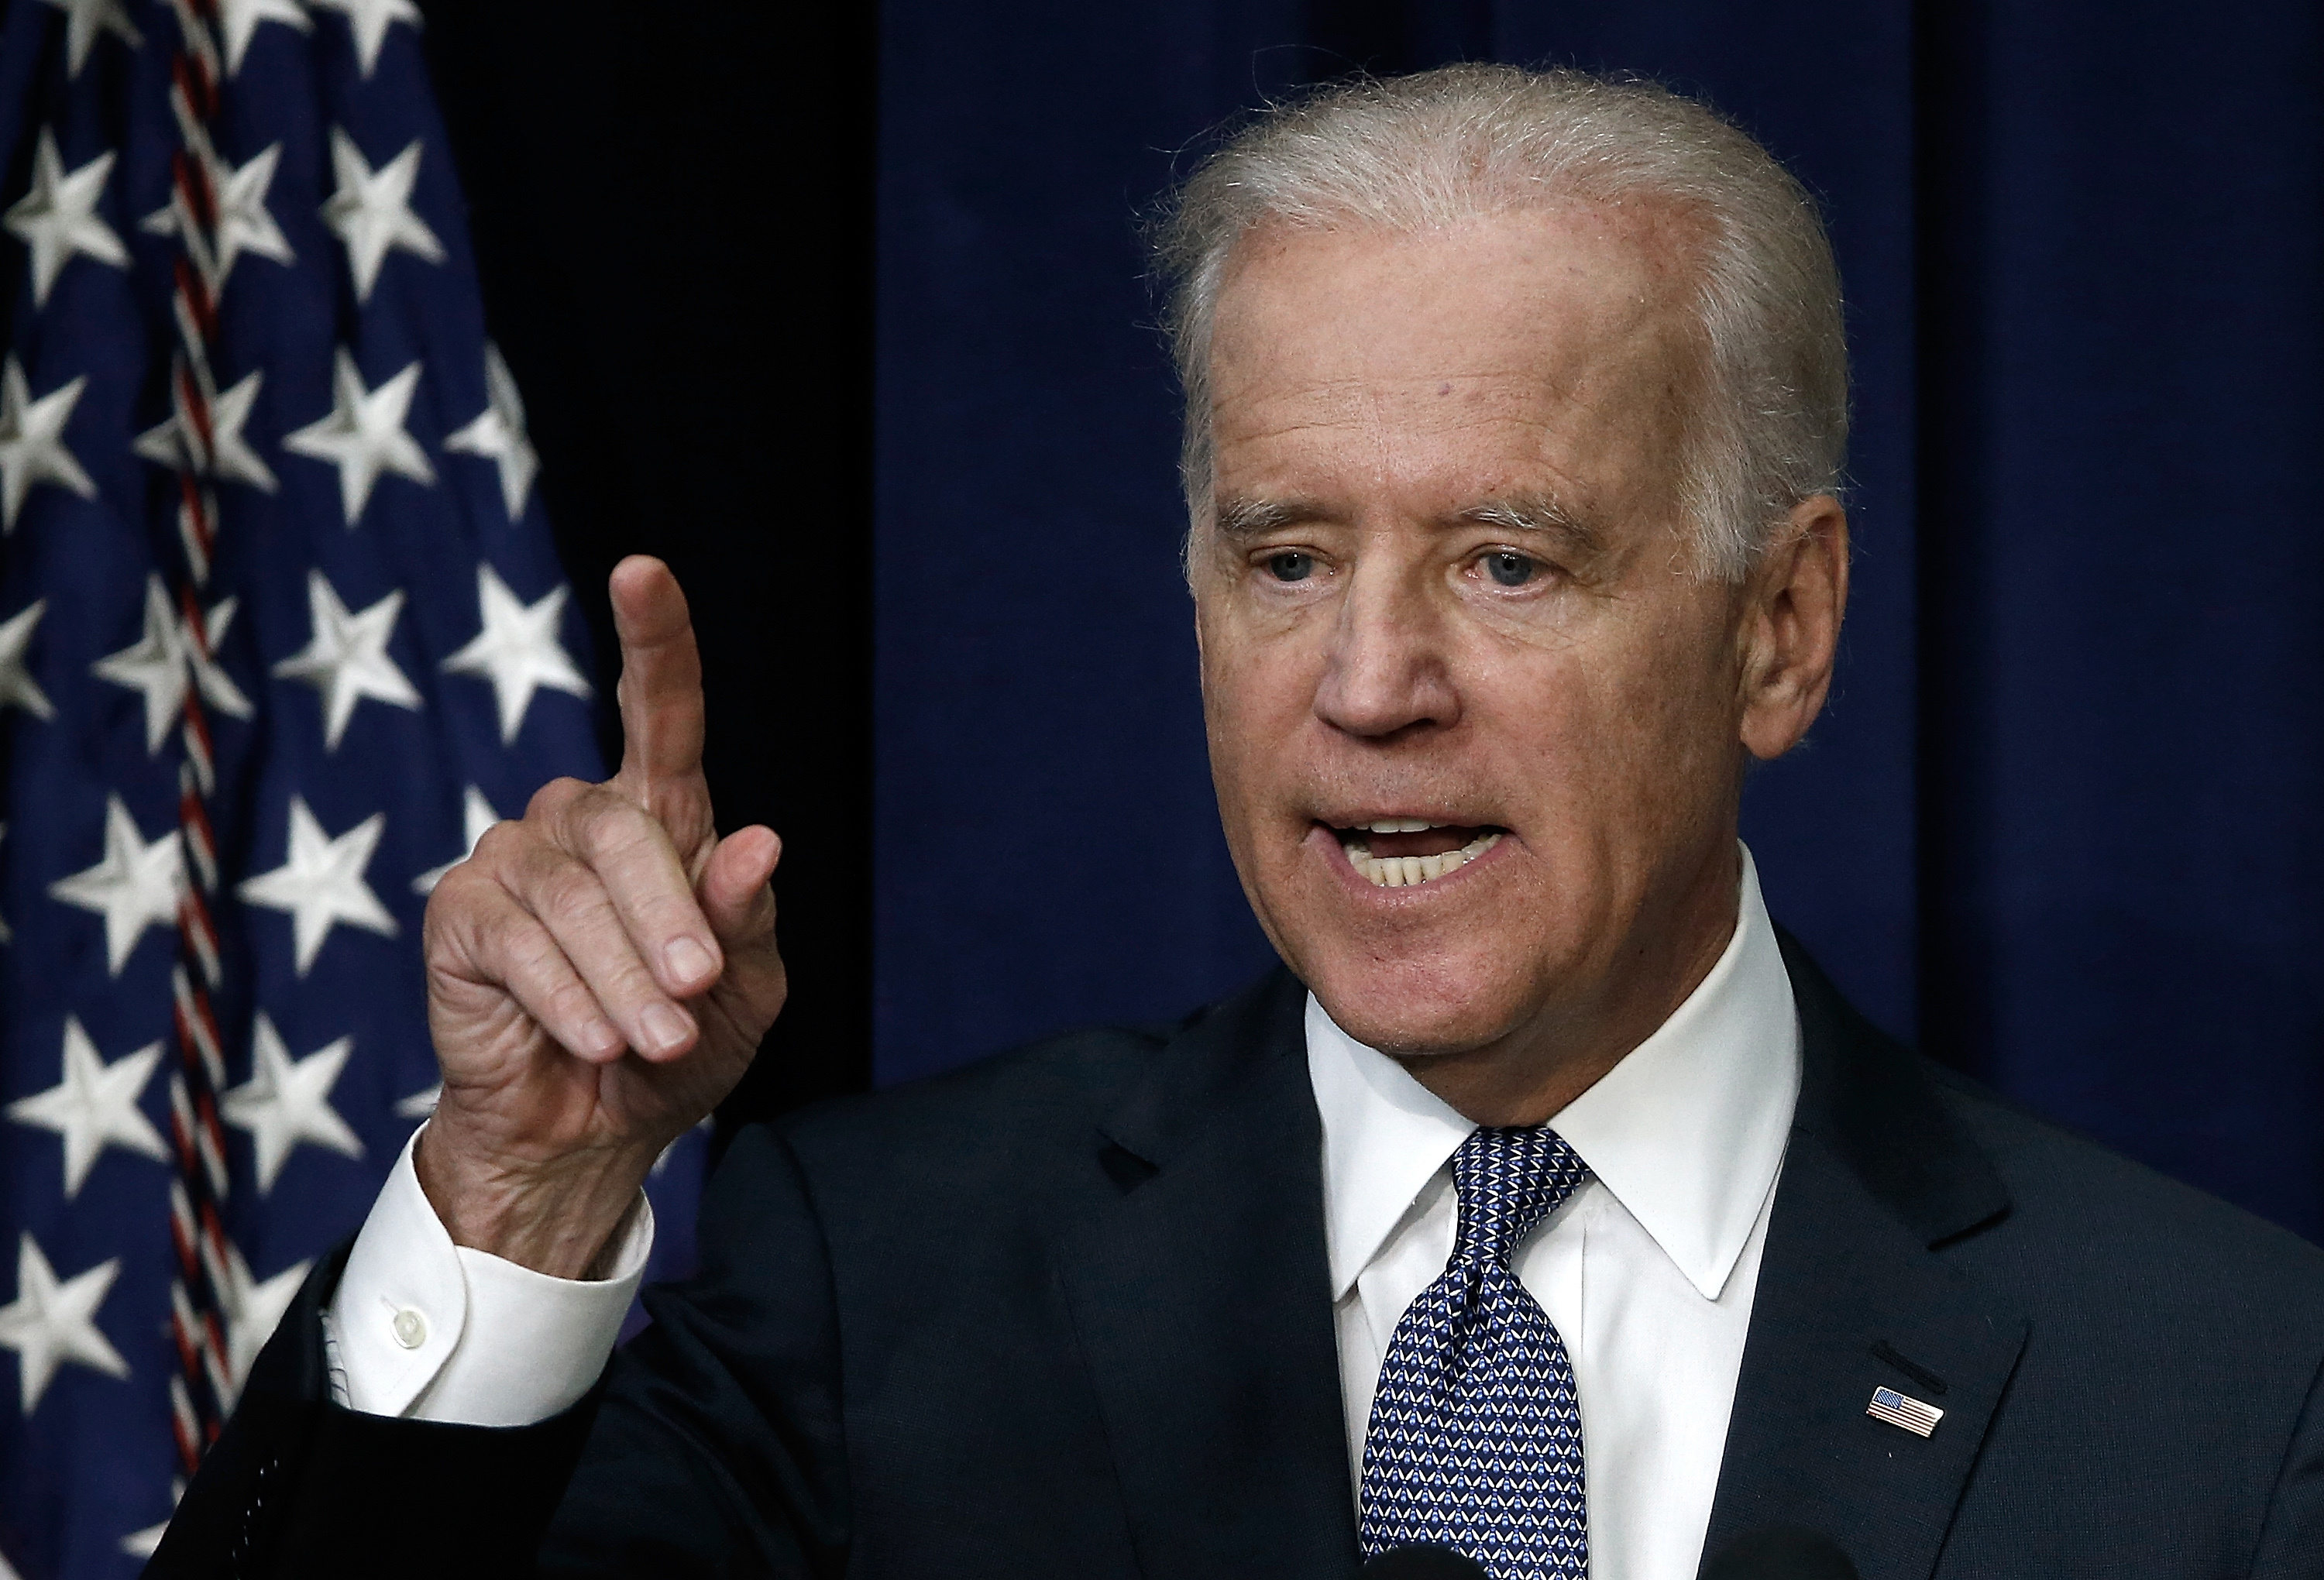 Vice President Joseph Biden. (Photo by Win McNamee/Getty Images)